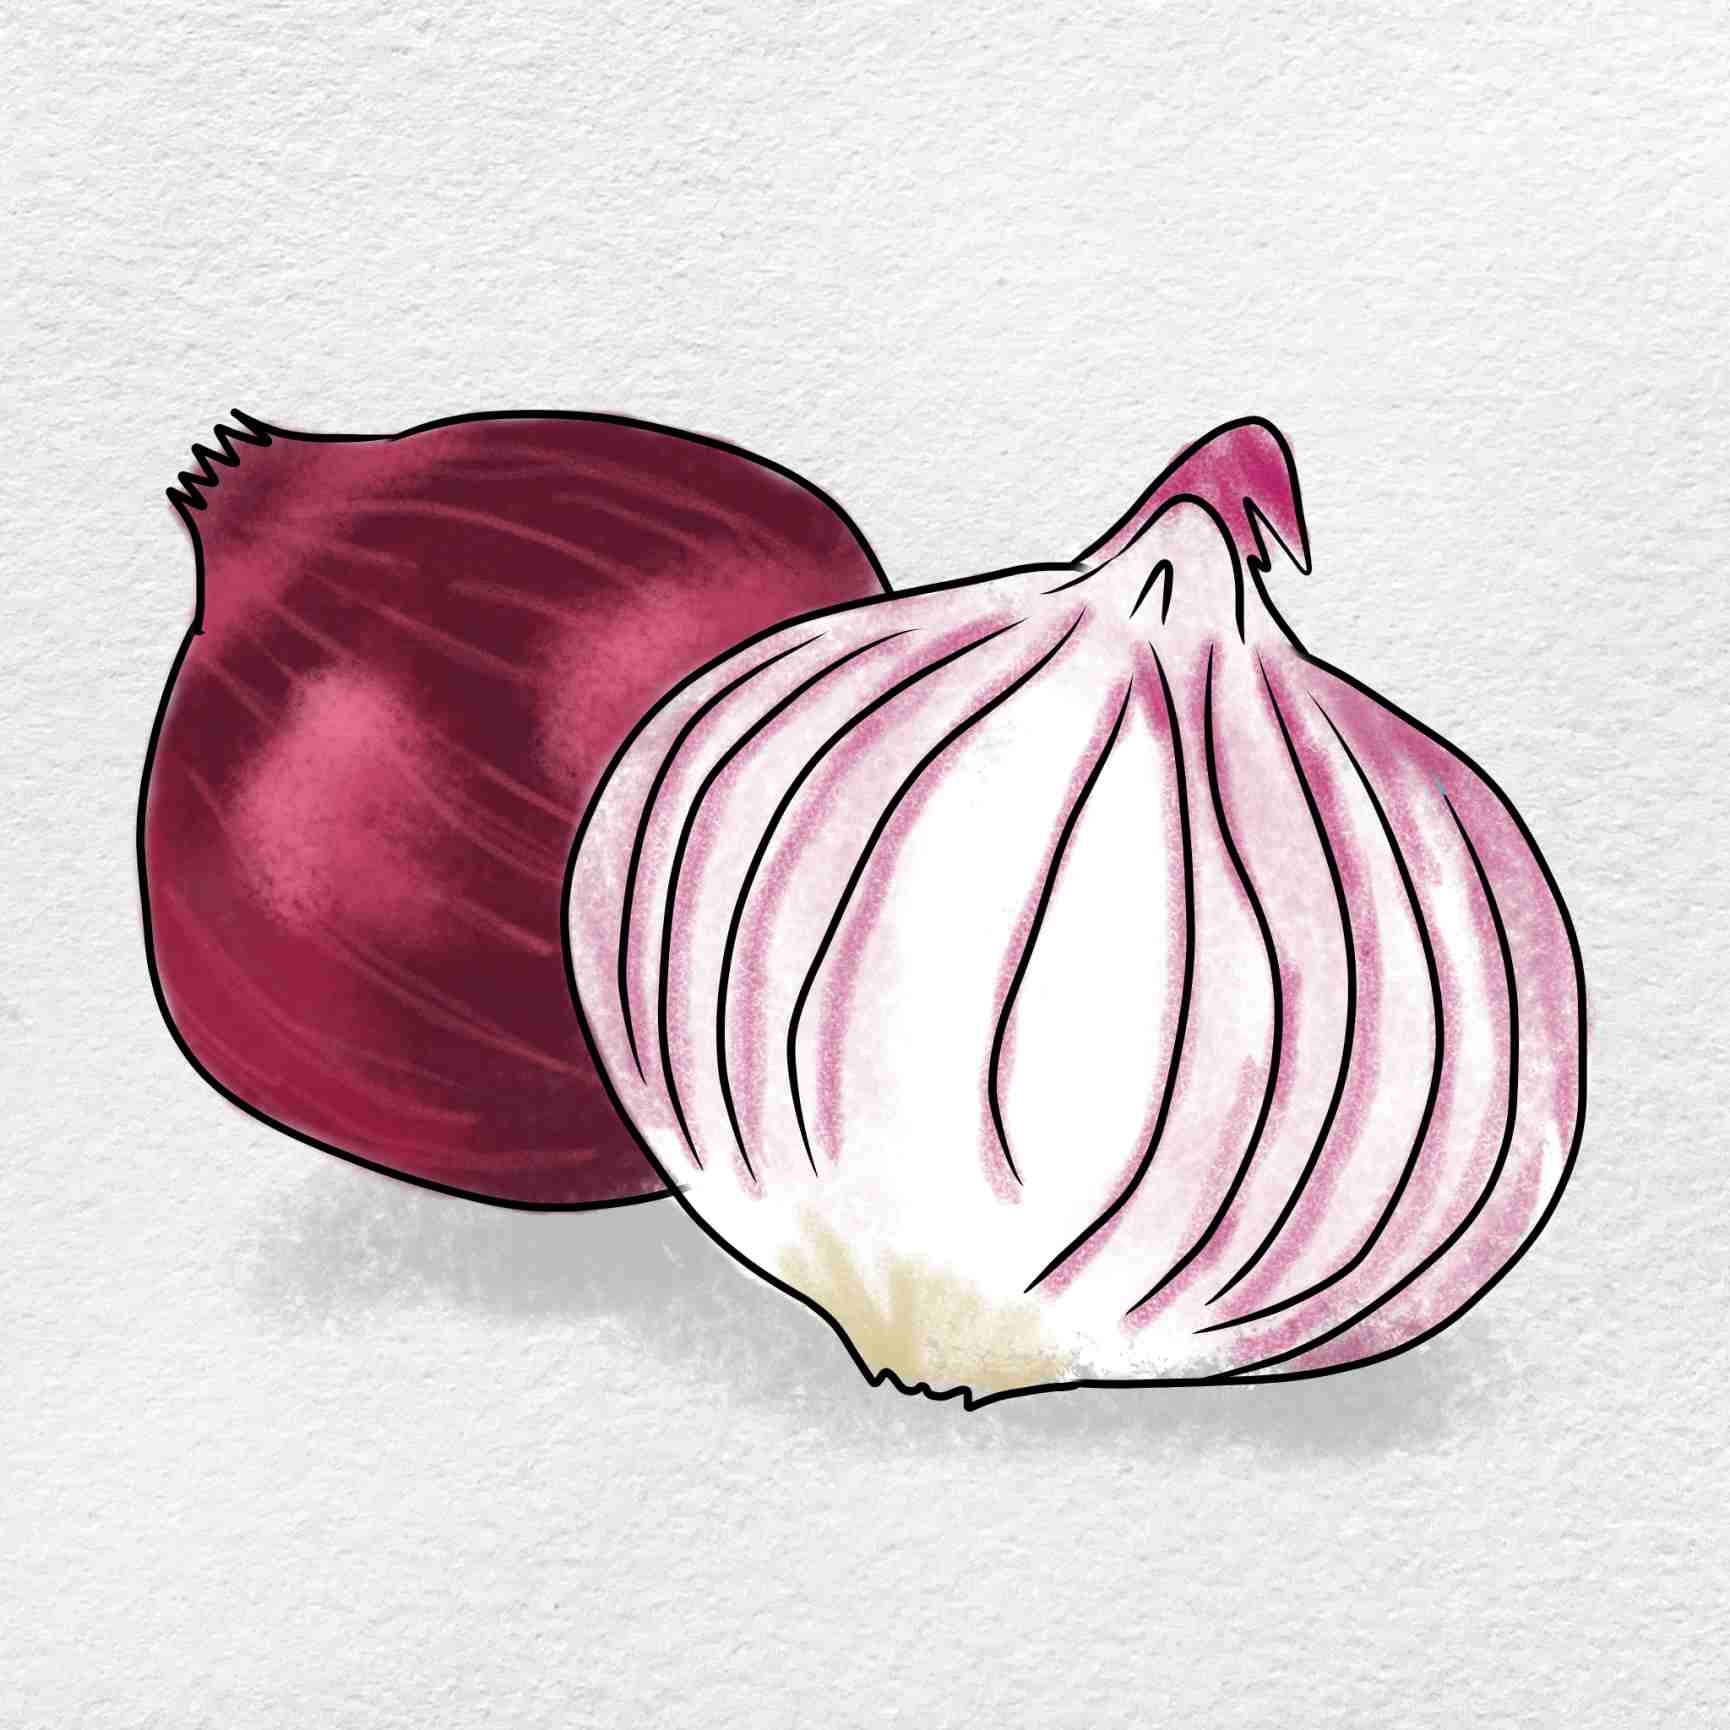 onion drawing images